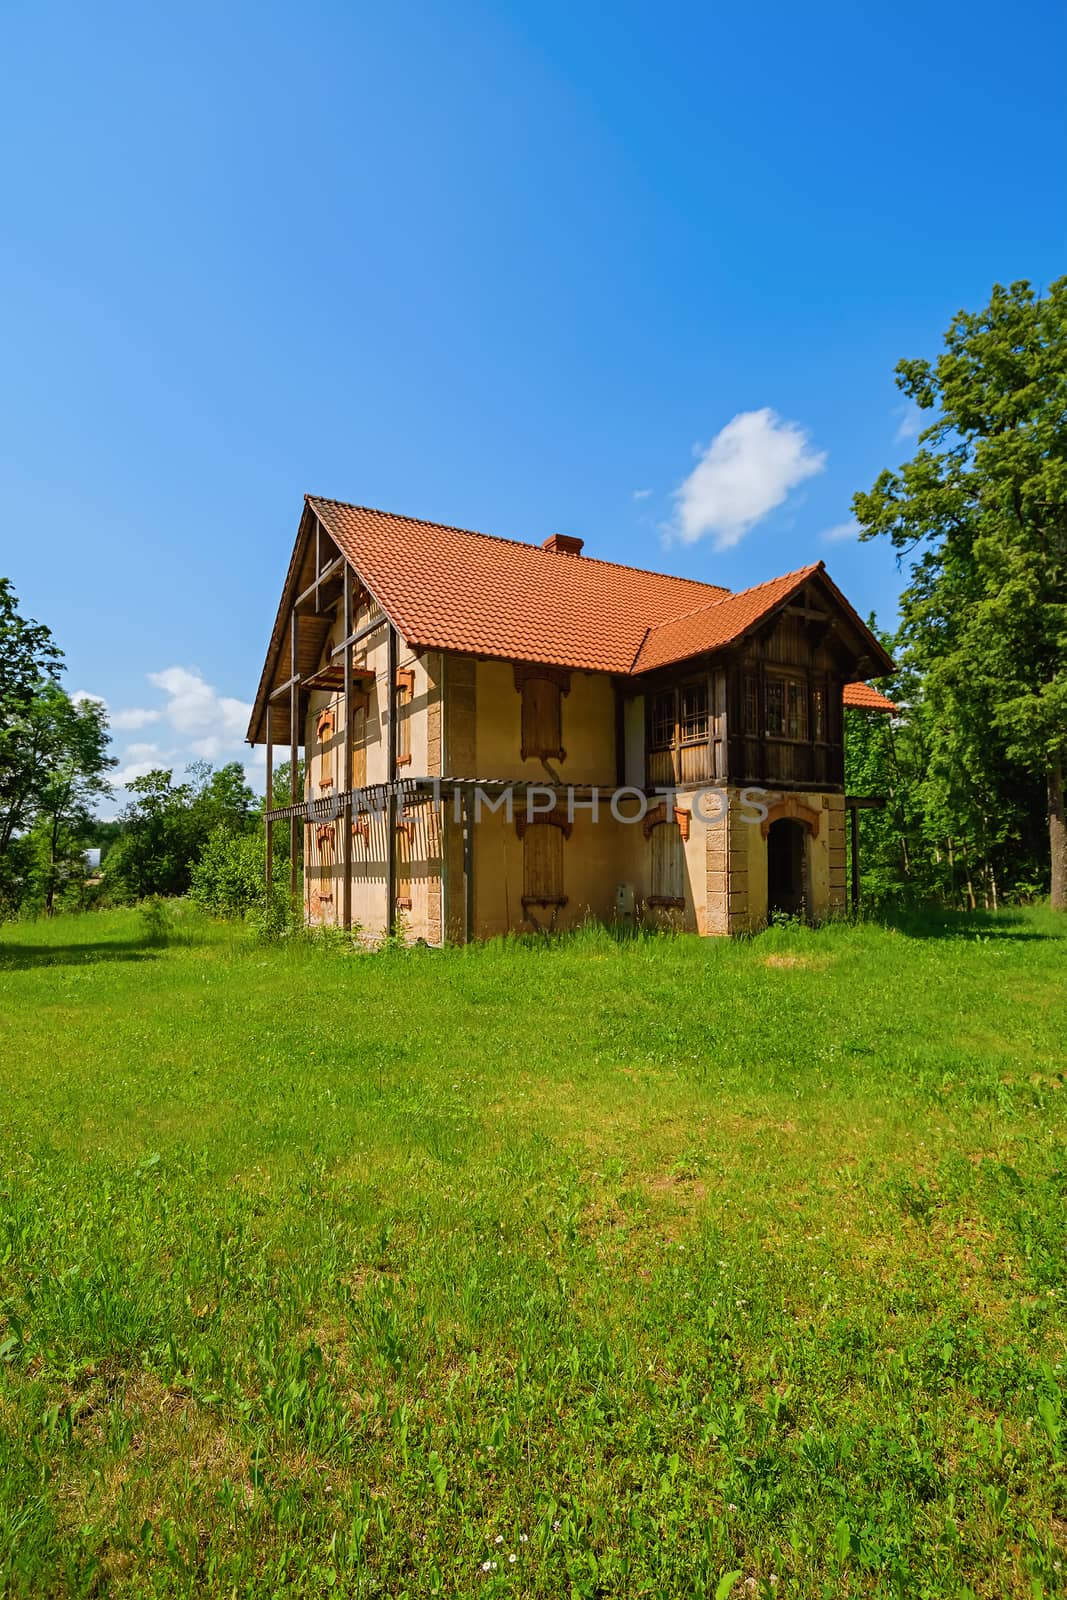 Abandoned rural house by SNR